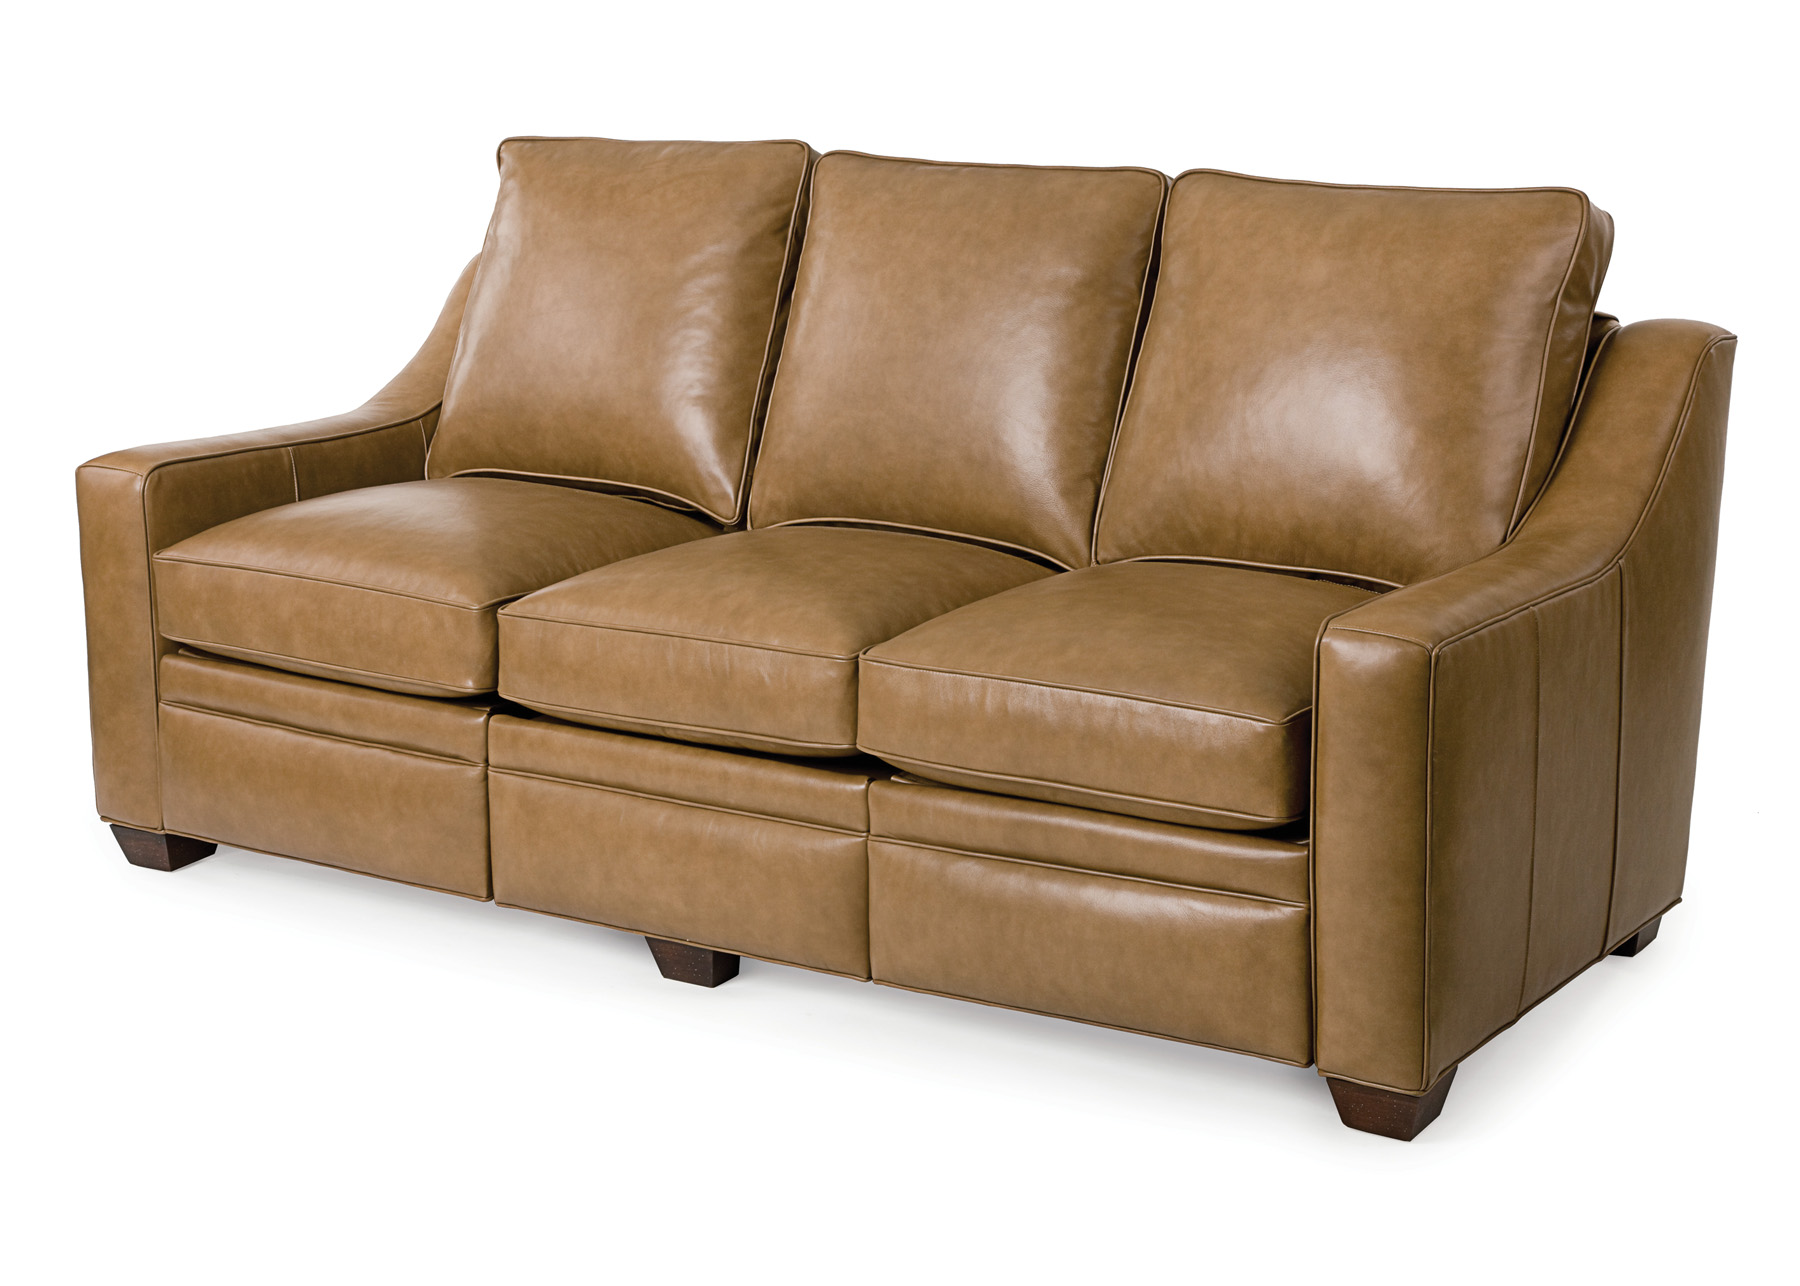 CAMPAIGN FULL POWER RECLINE SOFA 2-RECLINERS